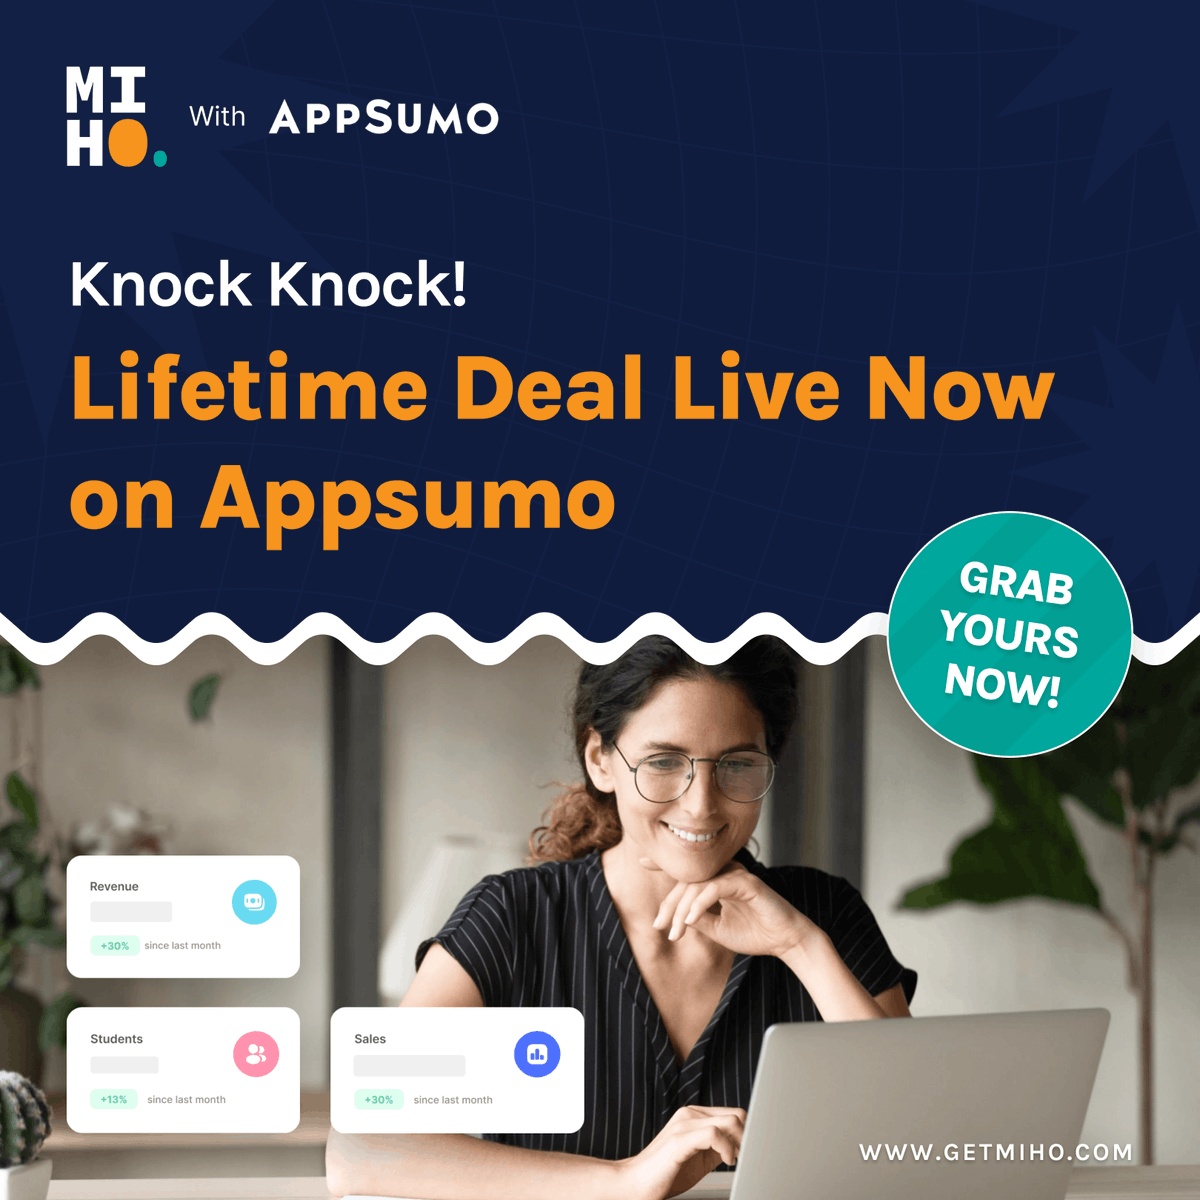 Exciting news! 🎉 The lifetime deal for @getmiho is now live on @AppSumo! Get access to our revolutionary product at an unbeatable price. Don't miss out on this opportunity. 
#Miho #AppSumo #LifetimeDeal

@hanuj_t